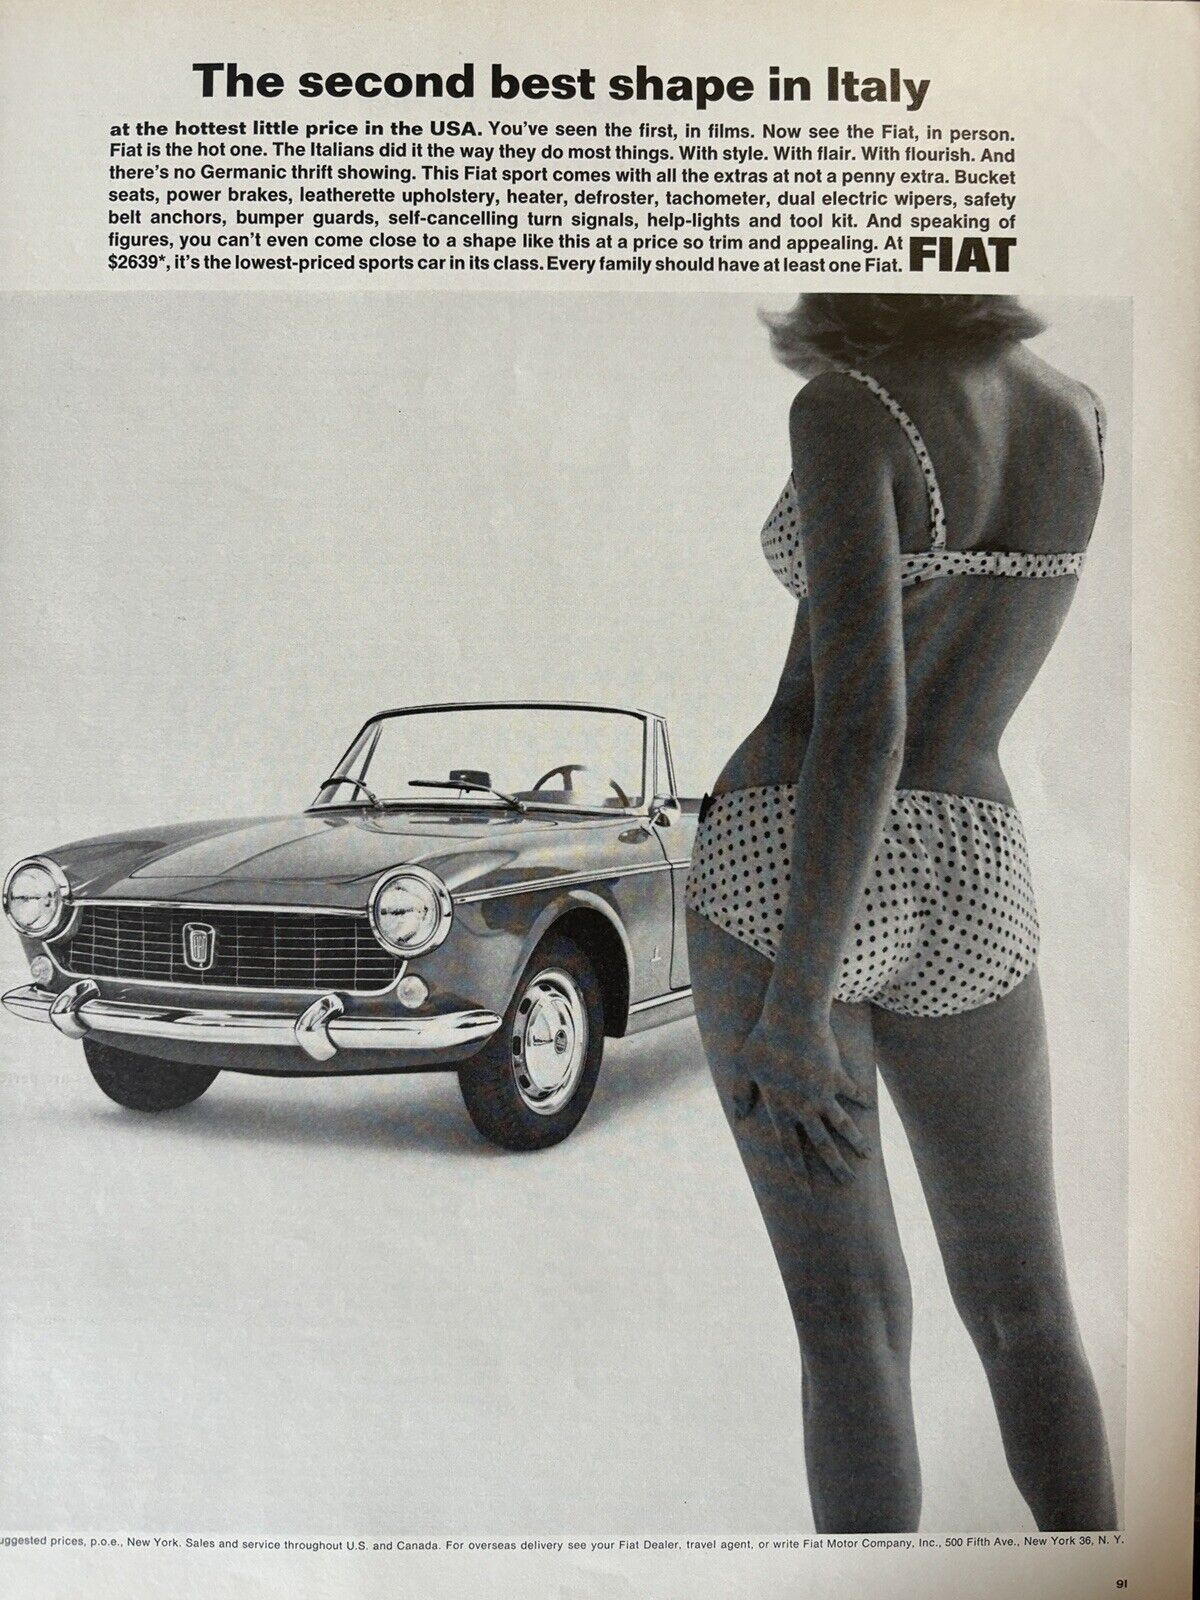 FIAT AUTOMOBILE CONVERTIBLE THE SECOND BEST SHAPE IN ITALY PRINT AD 1964